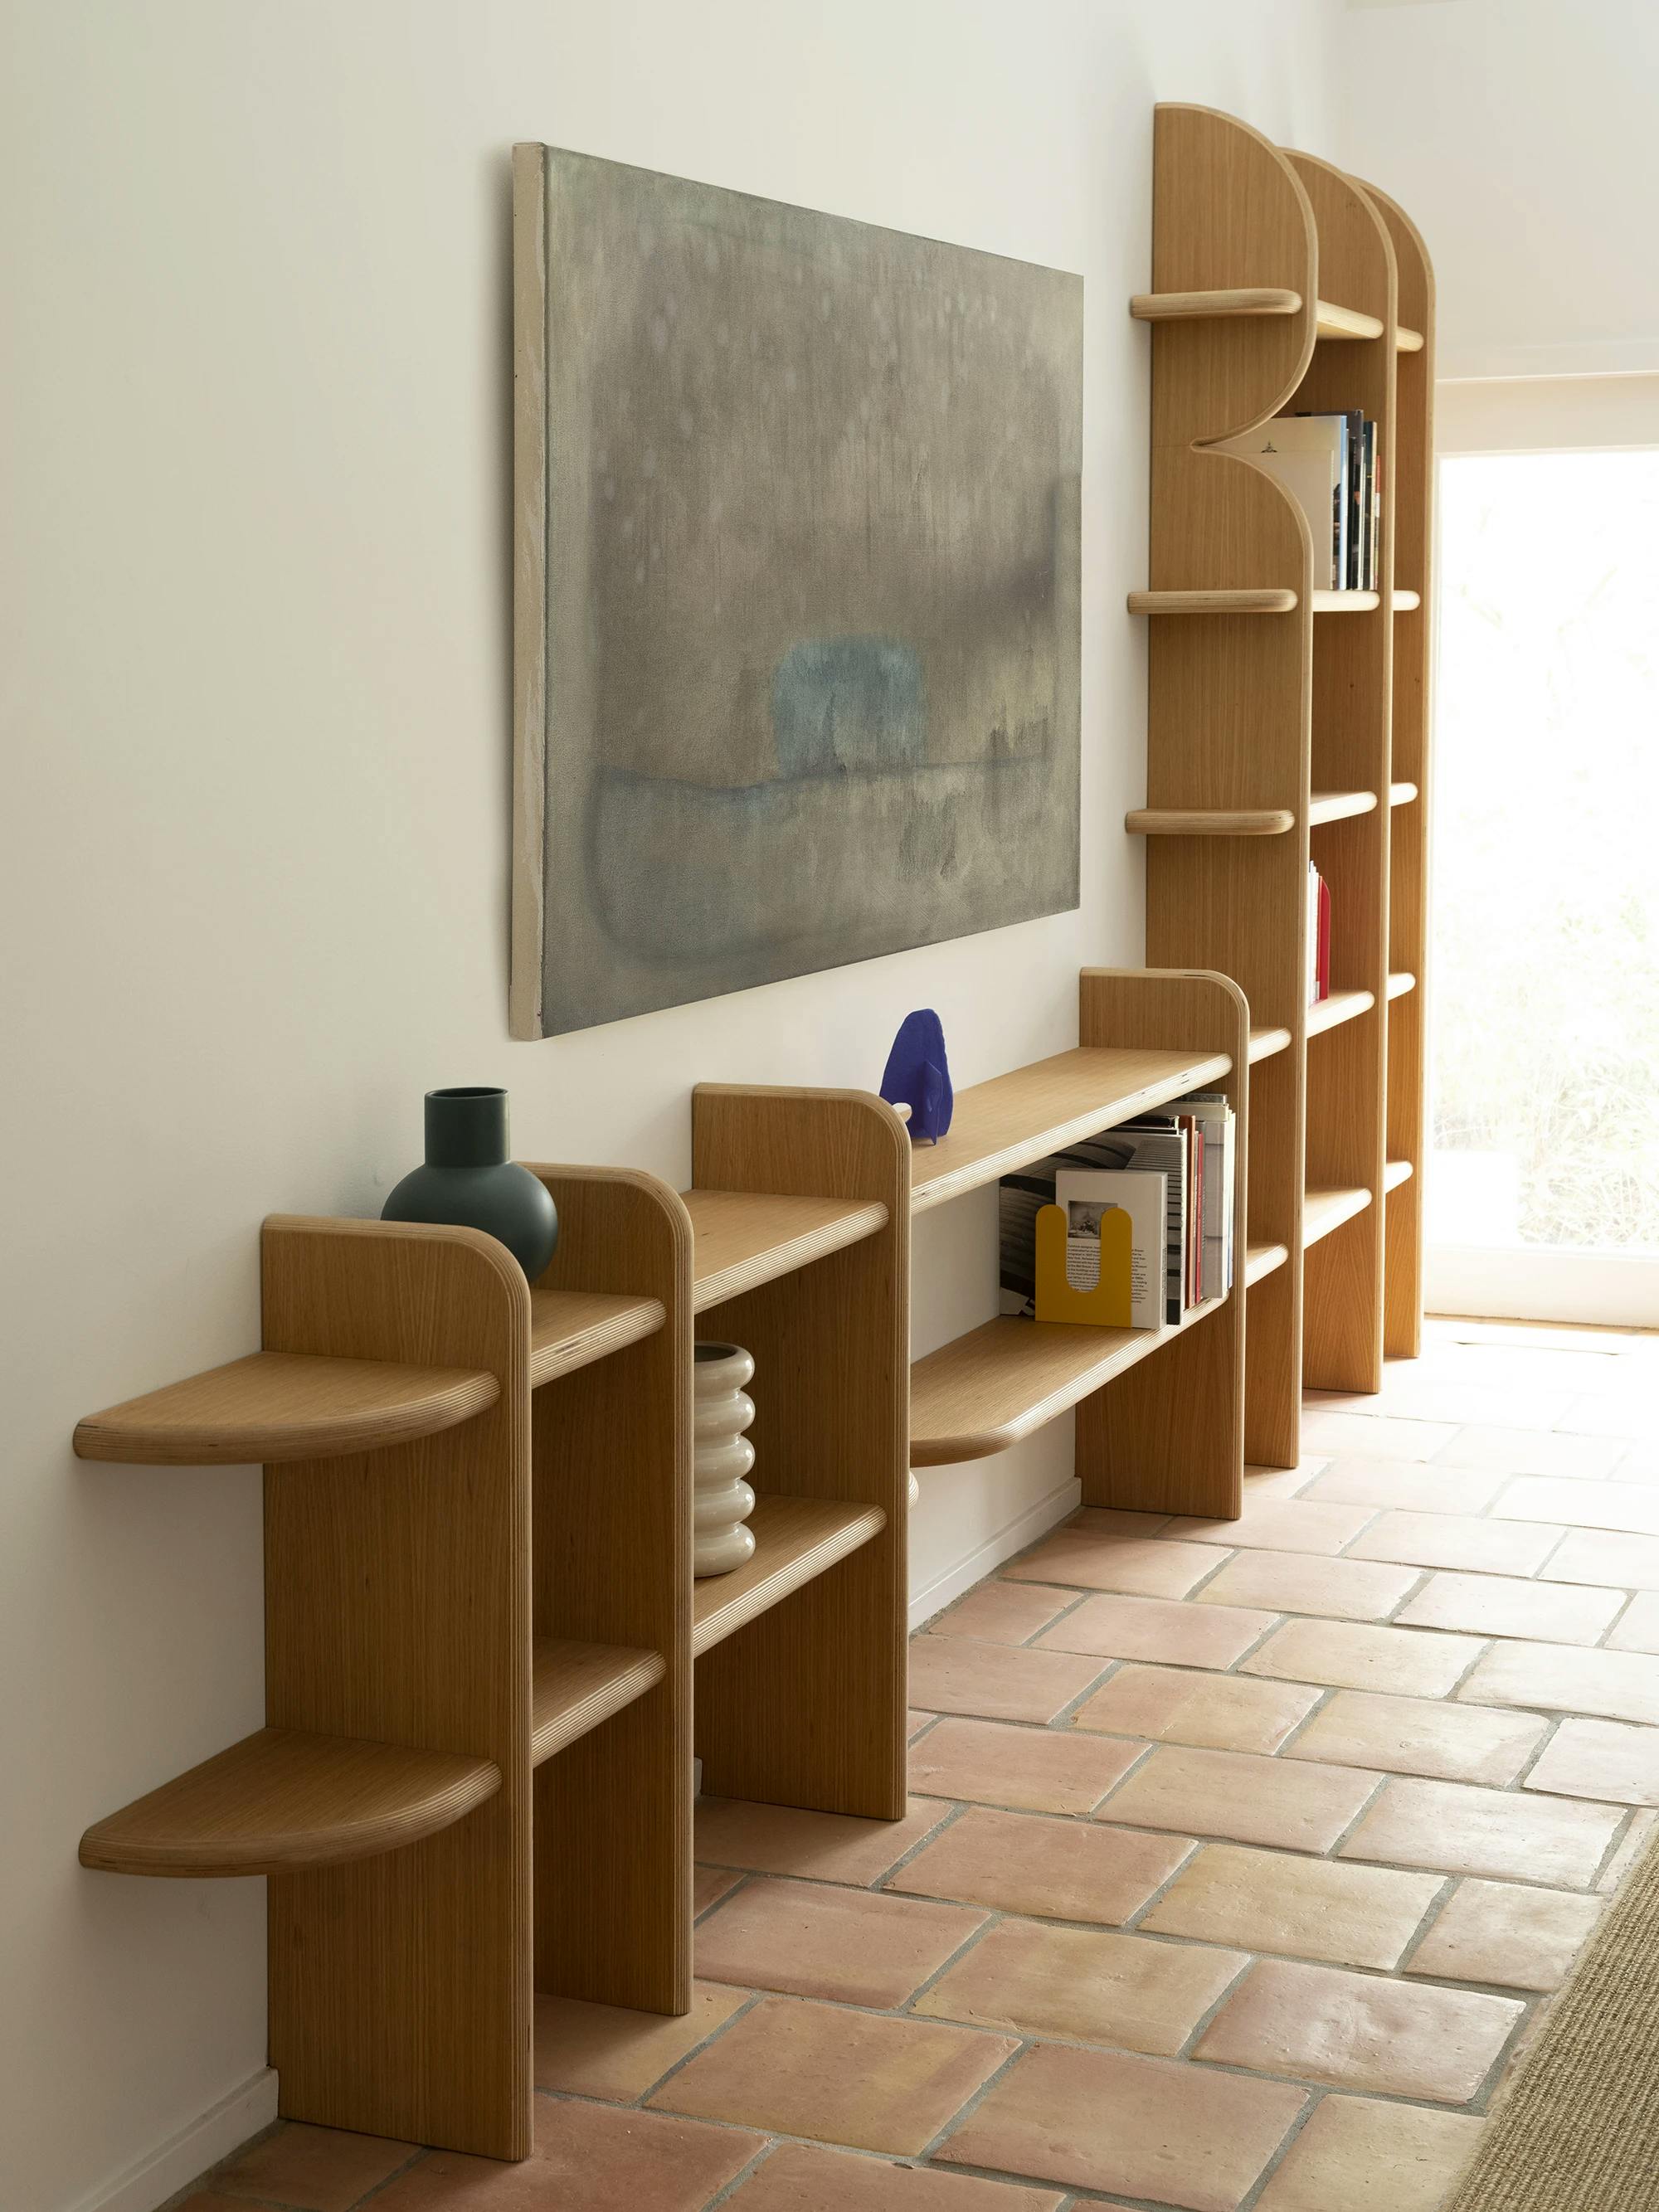 A wooden bookshelf with a painting by Bo Kim hung above. A small blue sculpture by Fitzhugh Karol sits on the bookshelf. 